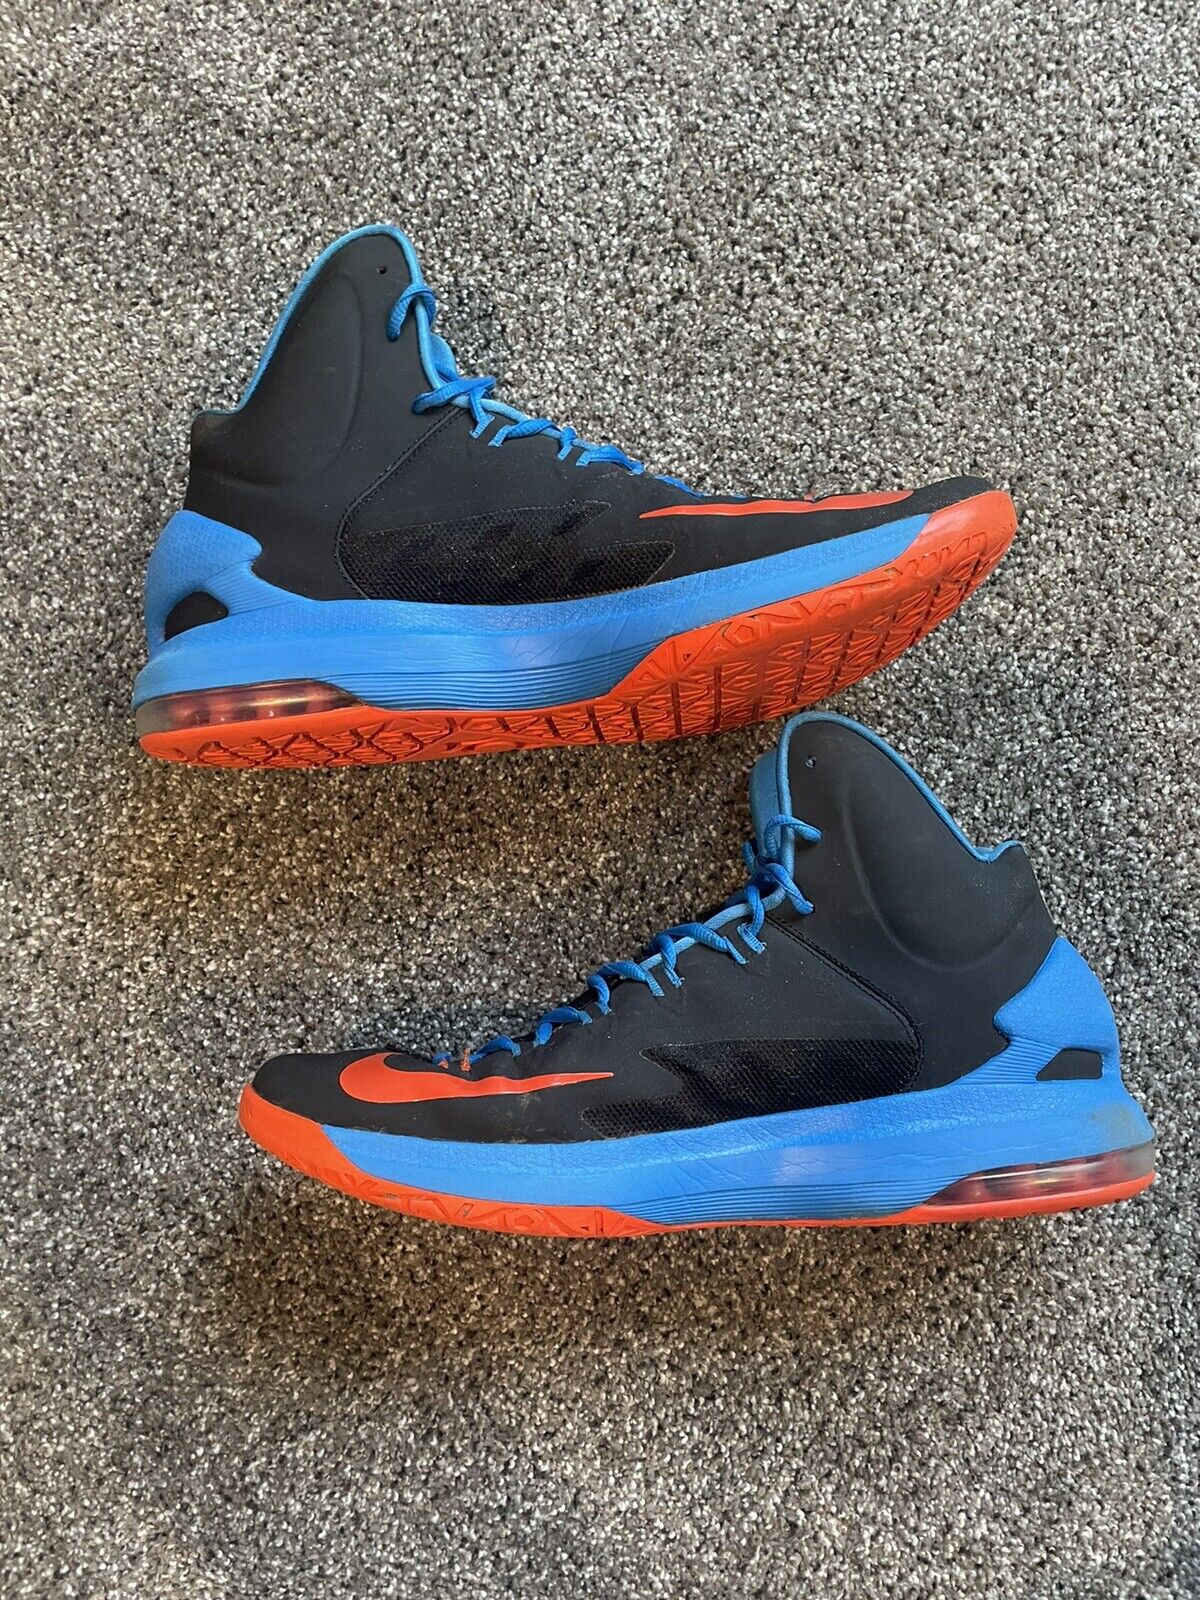 Nike ID KD V Glow In The Dark Sz 9 Kevin Durant 35 FAH QUE Dead Stock